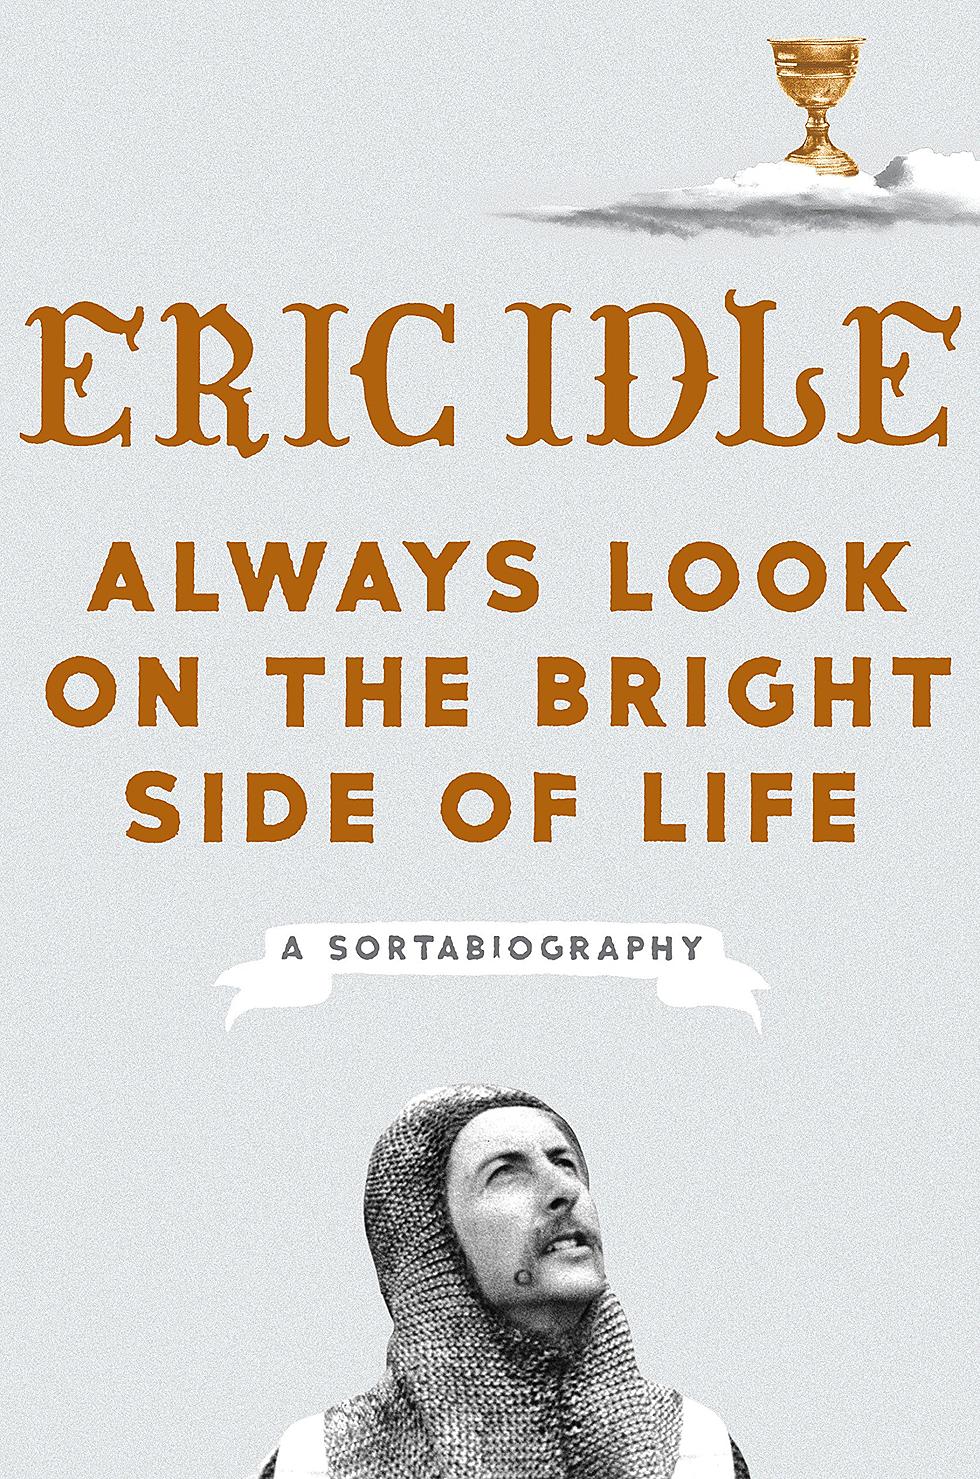 Monty Python&#8217;s Eric Idle going on book tour for new memoir